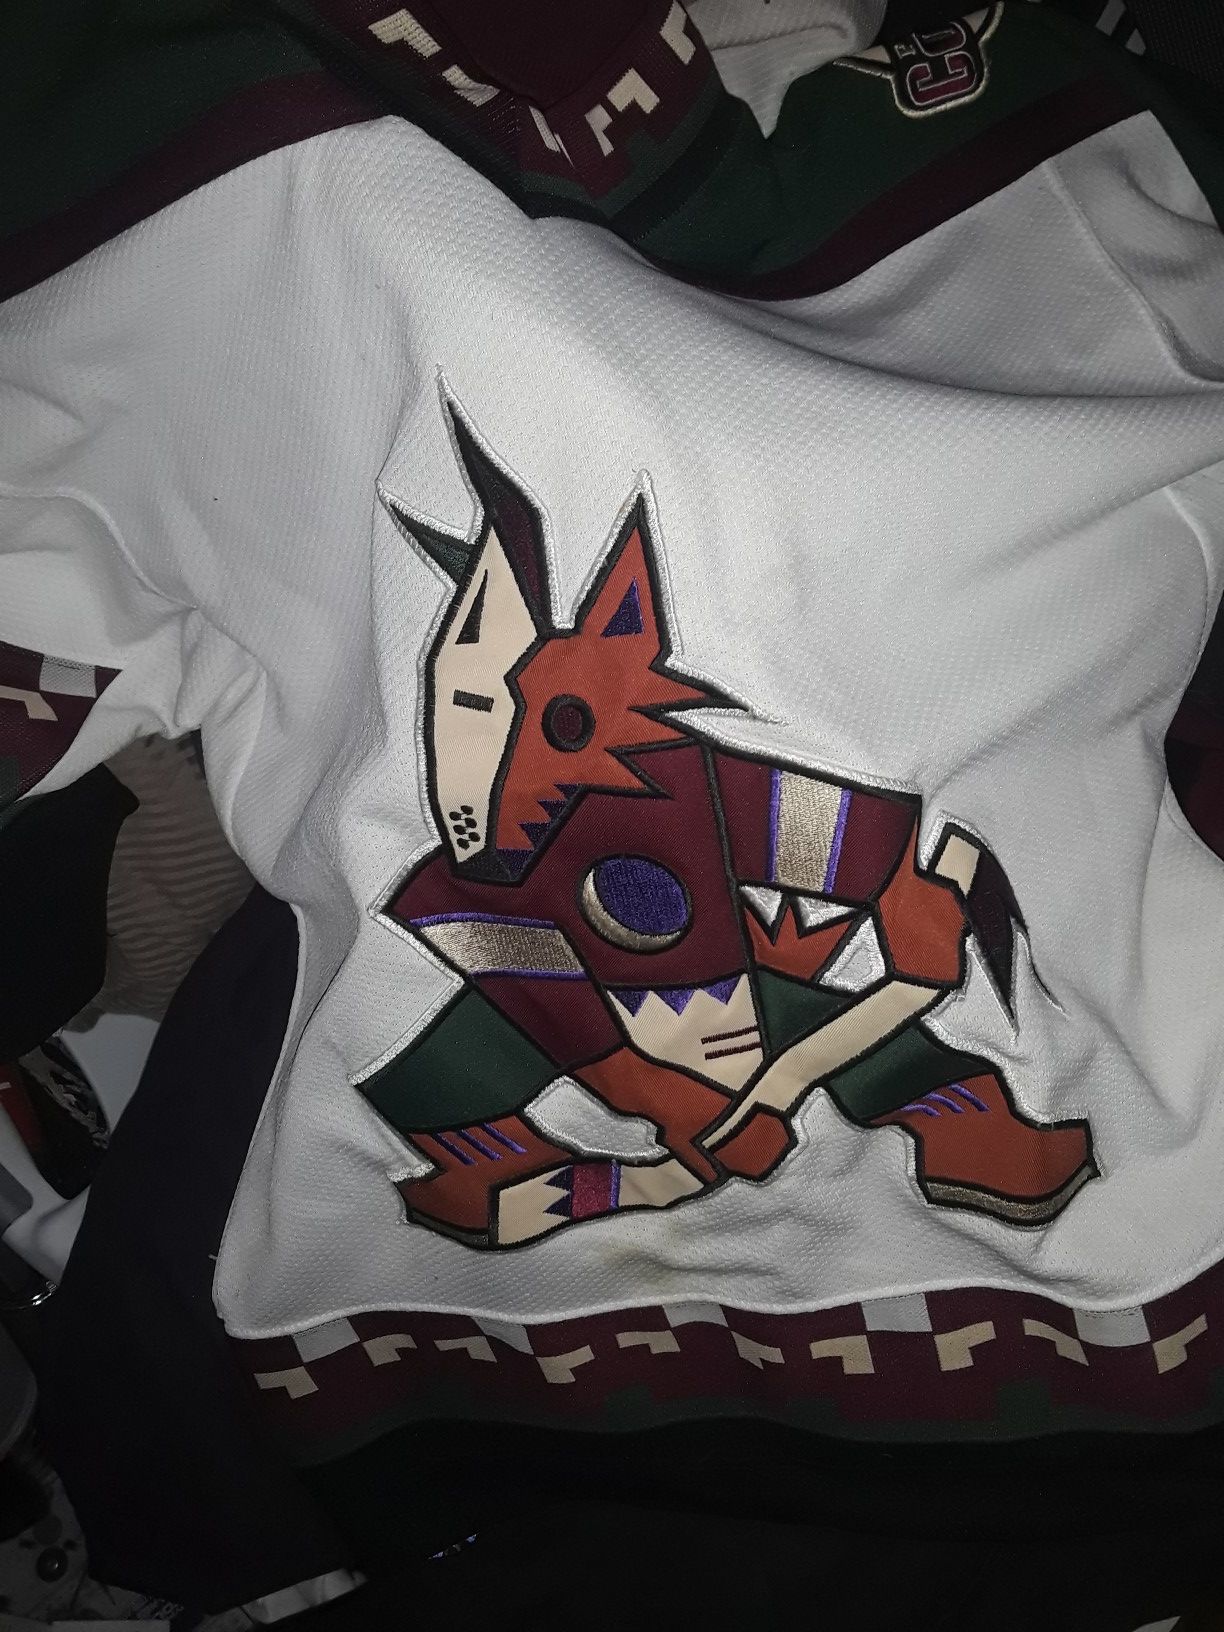 Oldschool coyotes Jersey youth